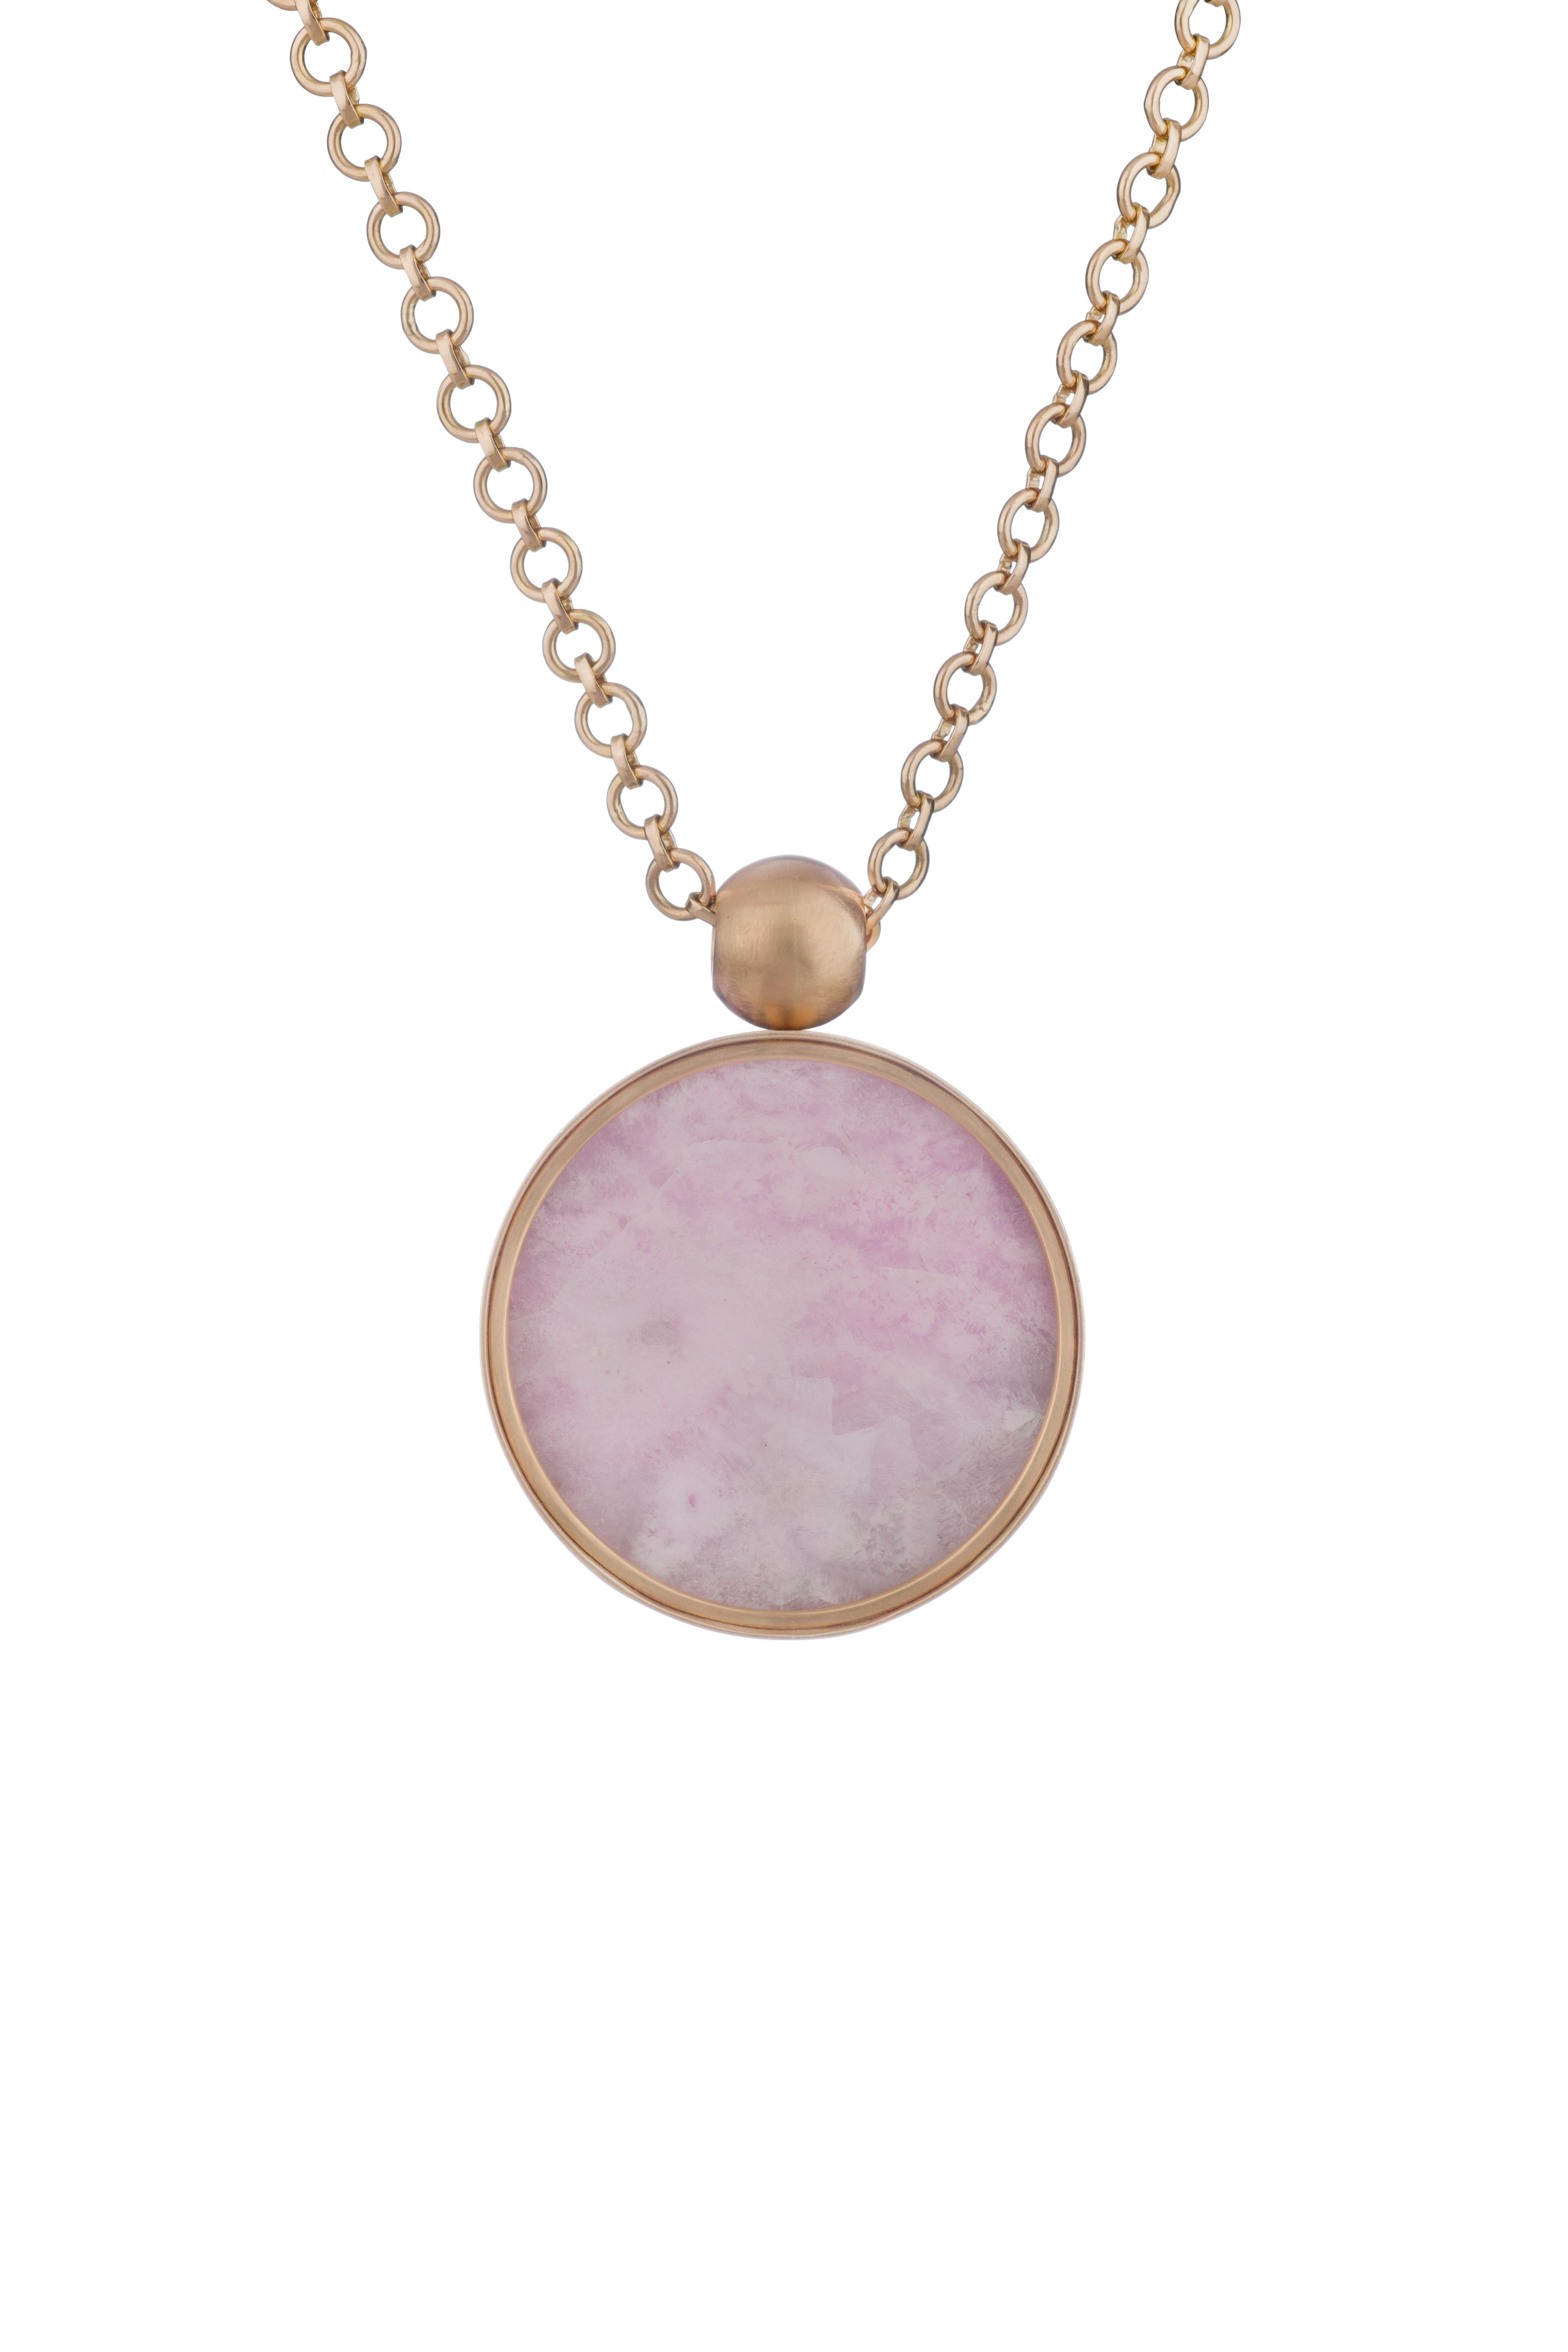 OUROBOROS' 'Lacy Clouds,' pink aragonite and blue lace chalcedony set in 18kt gold.

There are four chain options, all are handmade, 36